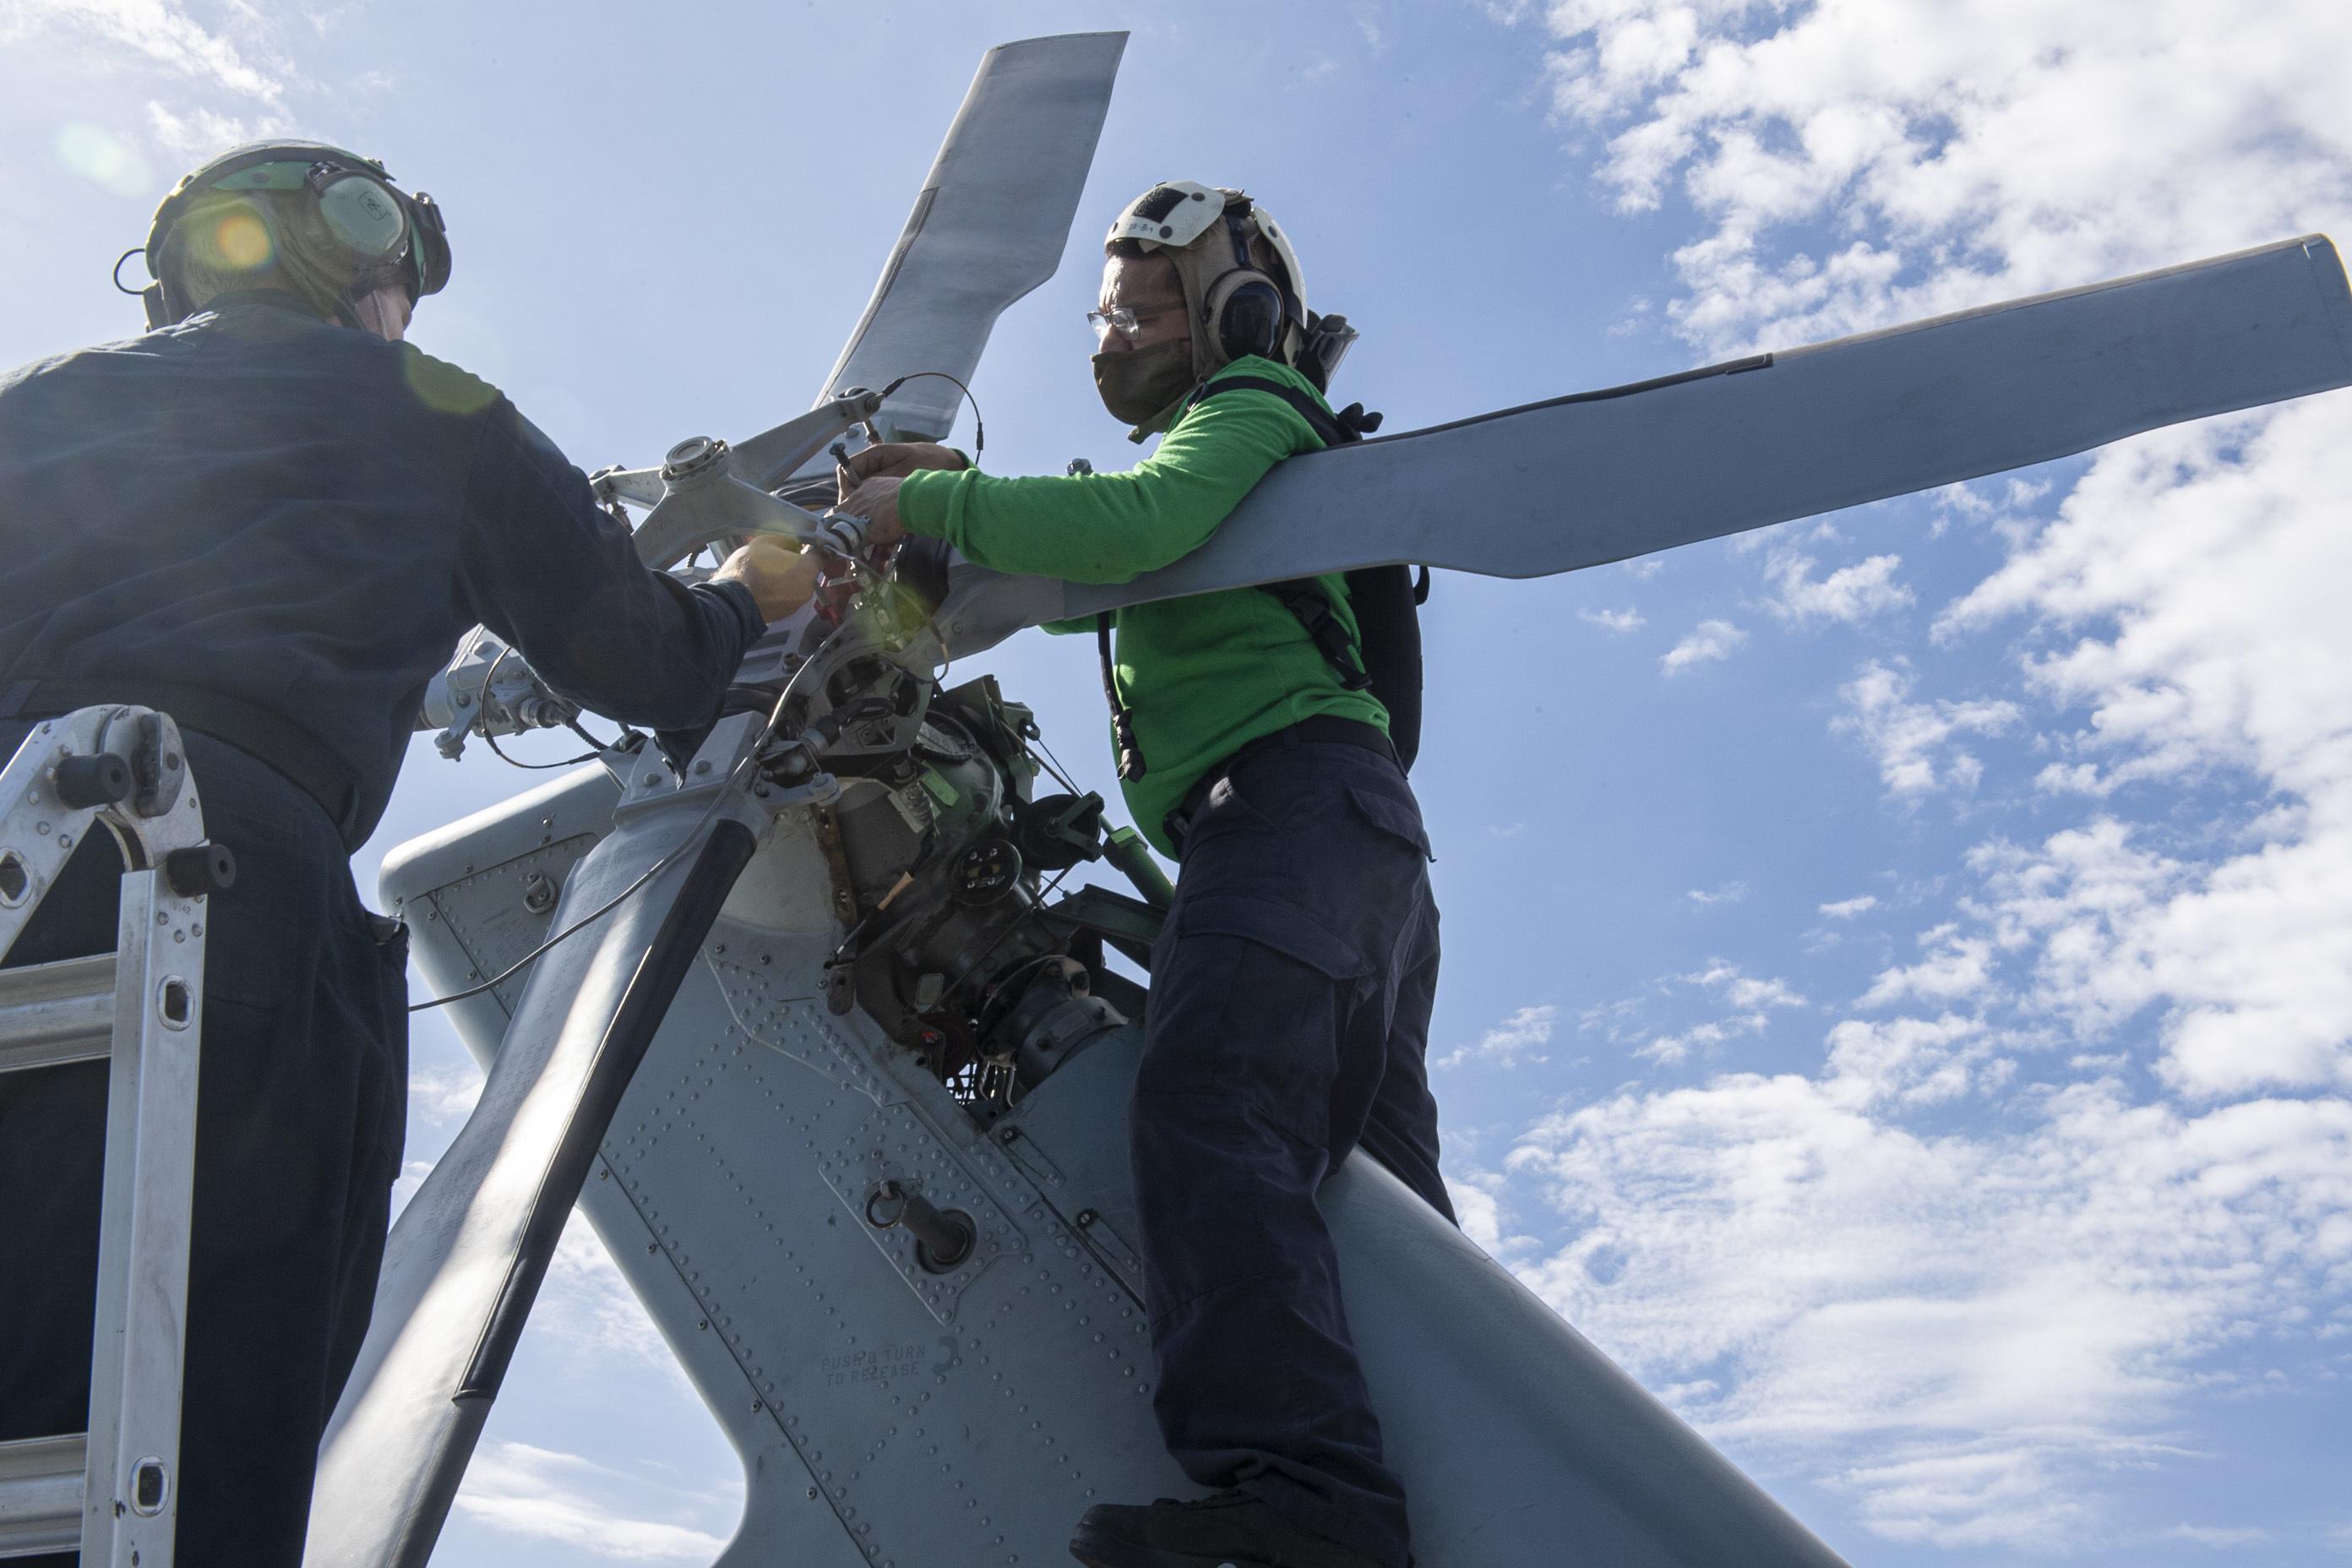 Maintenance on the tail rotor of a MH-60S Seahawk helicopter